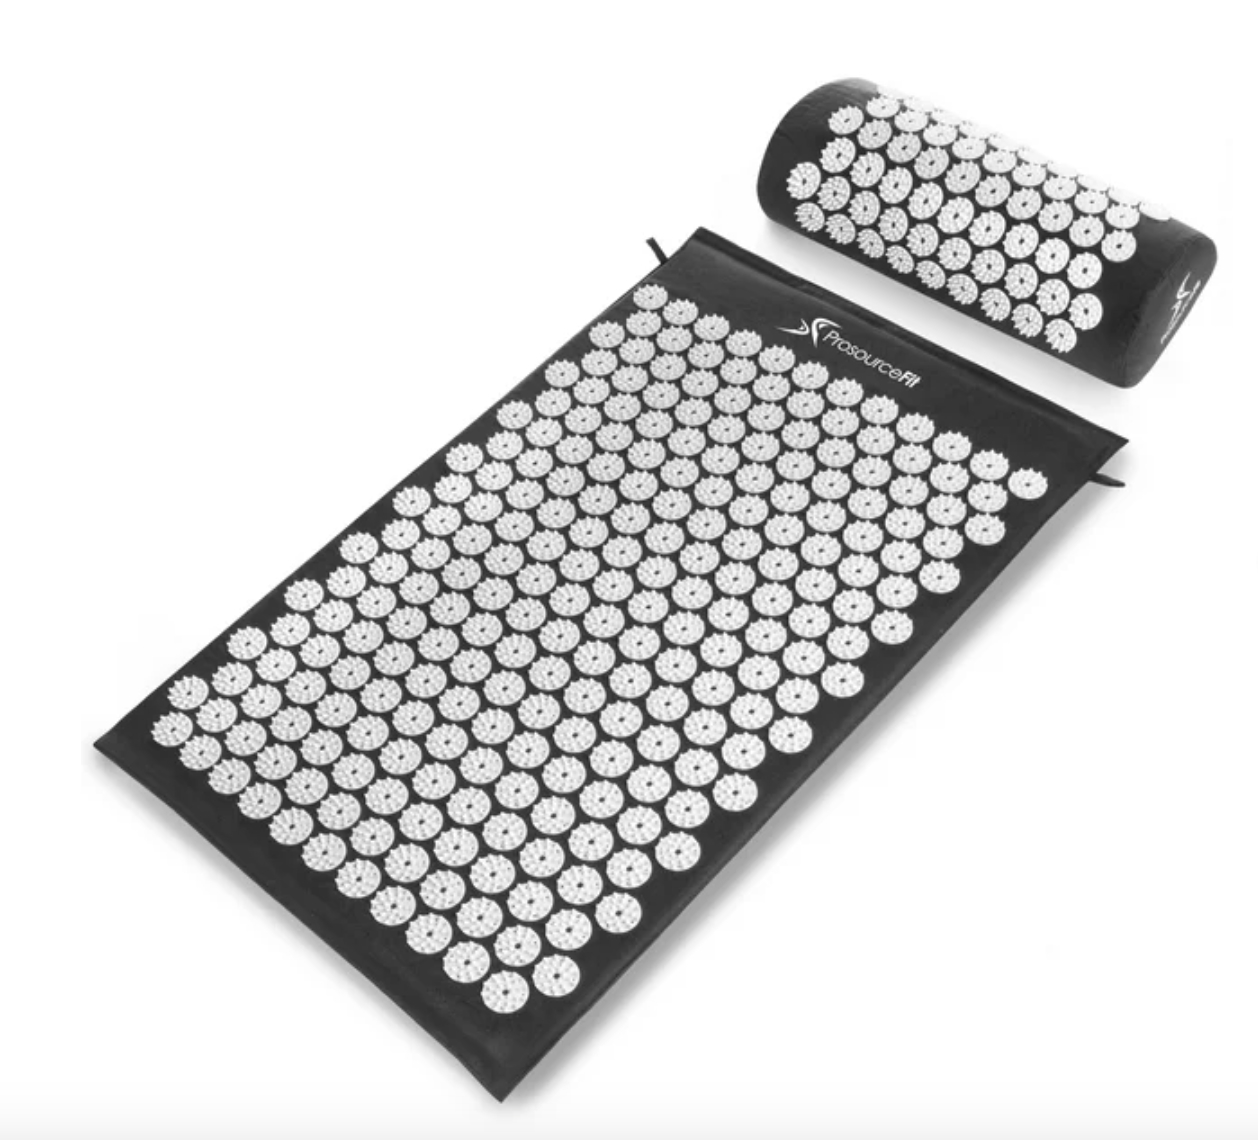 Acupressure mat and pillow set on a white background